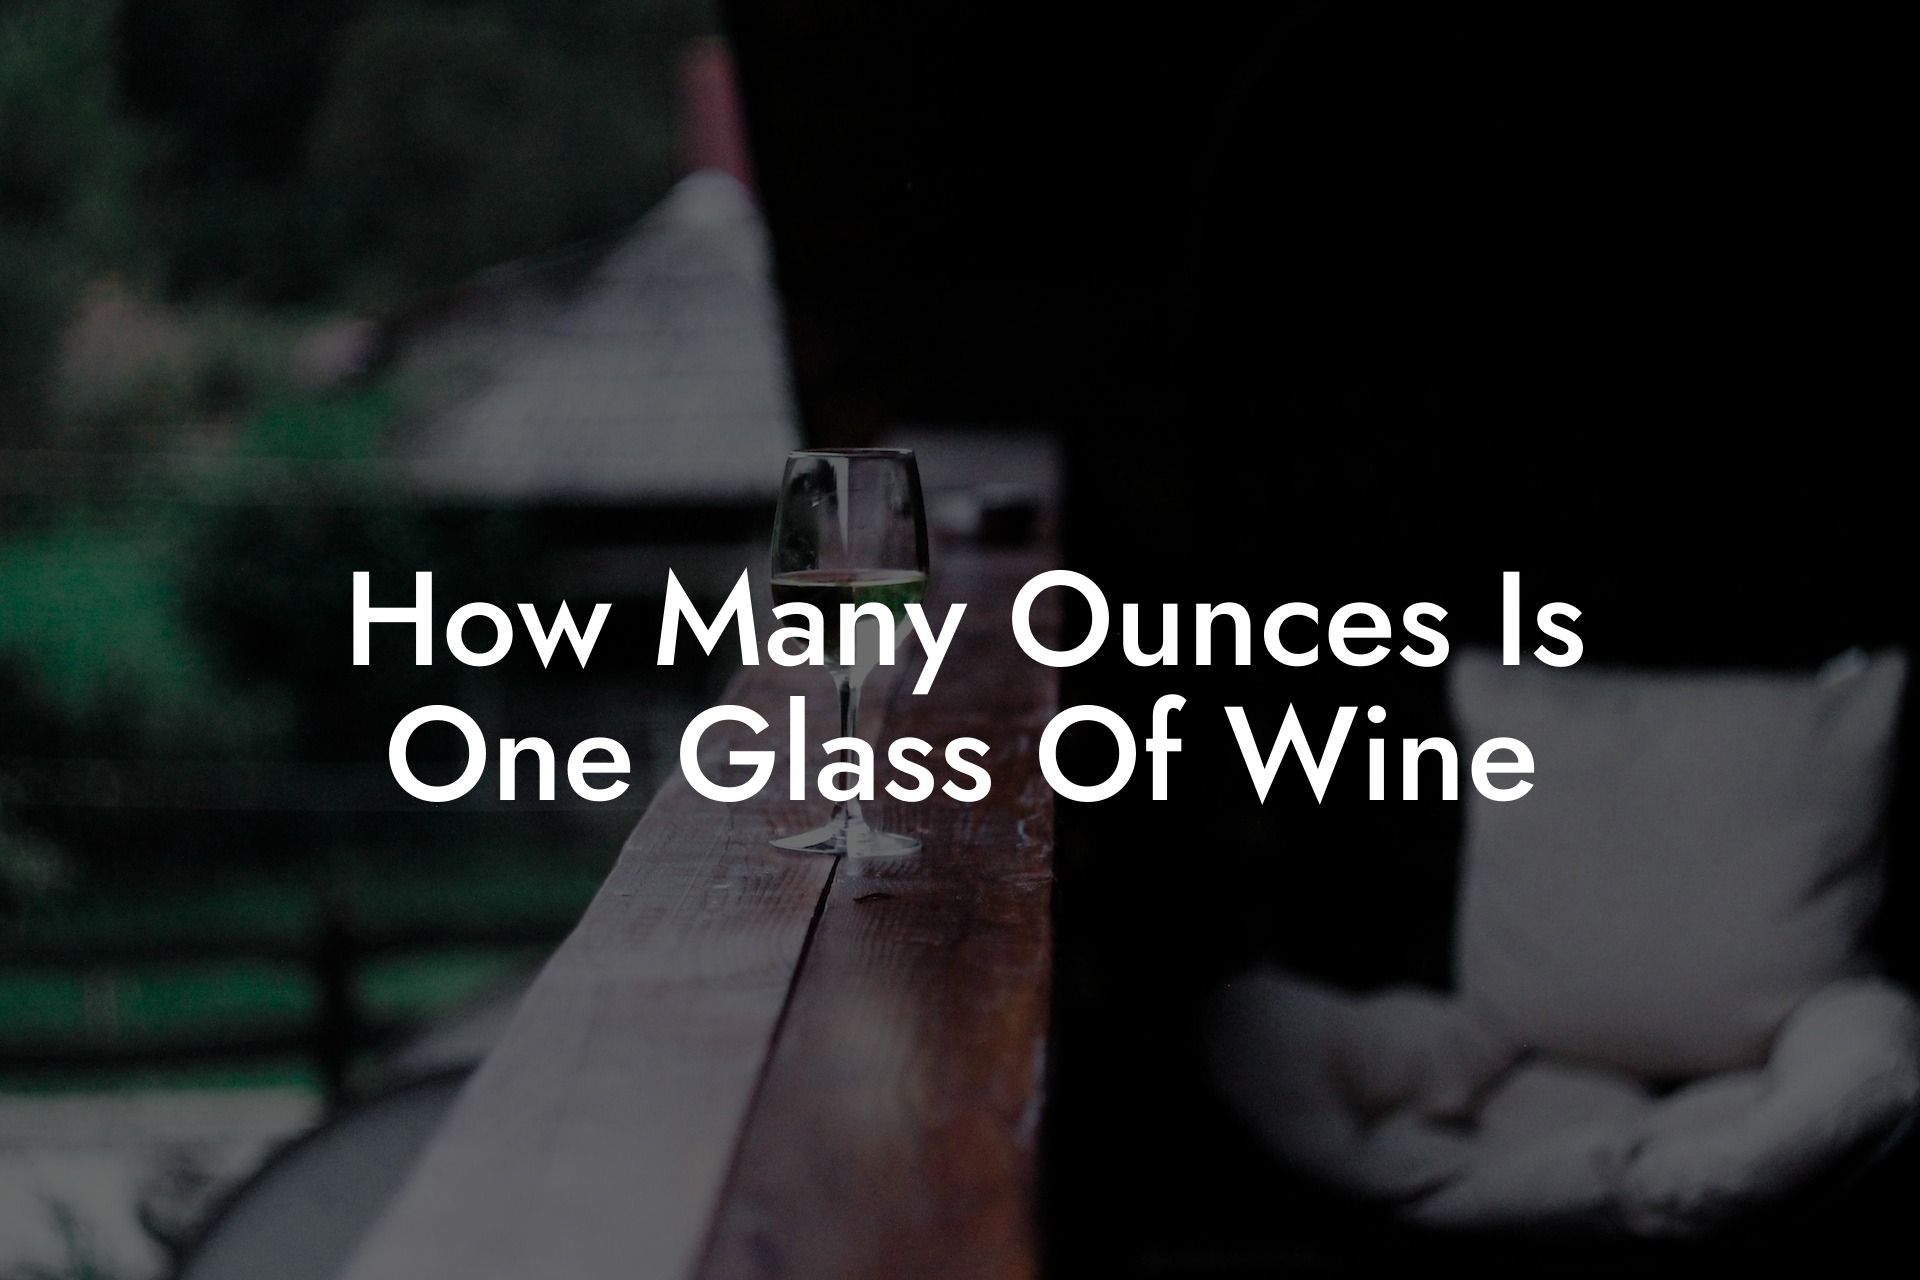 How Many Ounces Is One Glass Of Wine